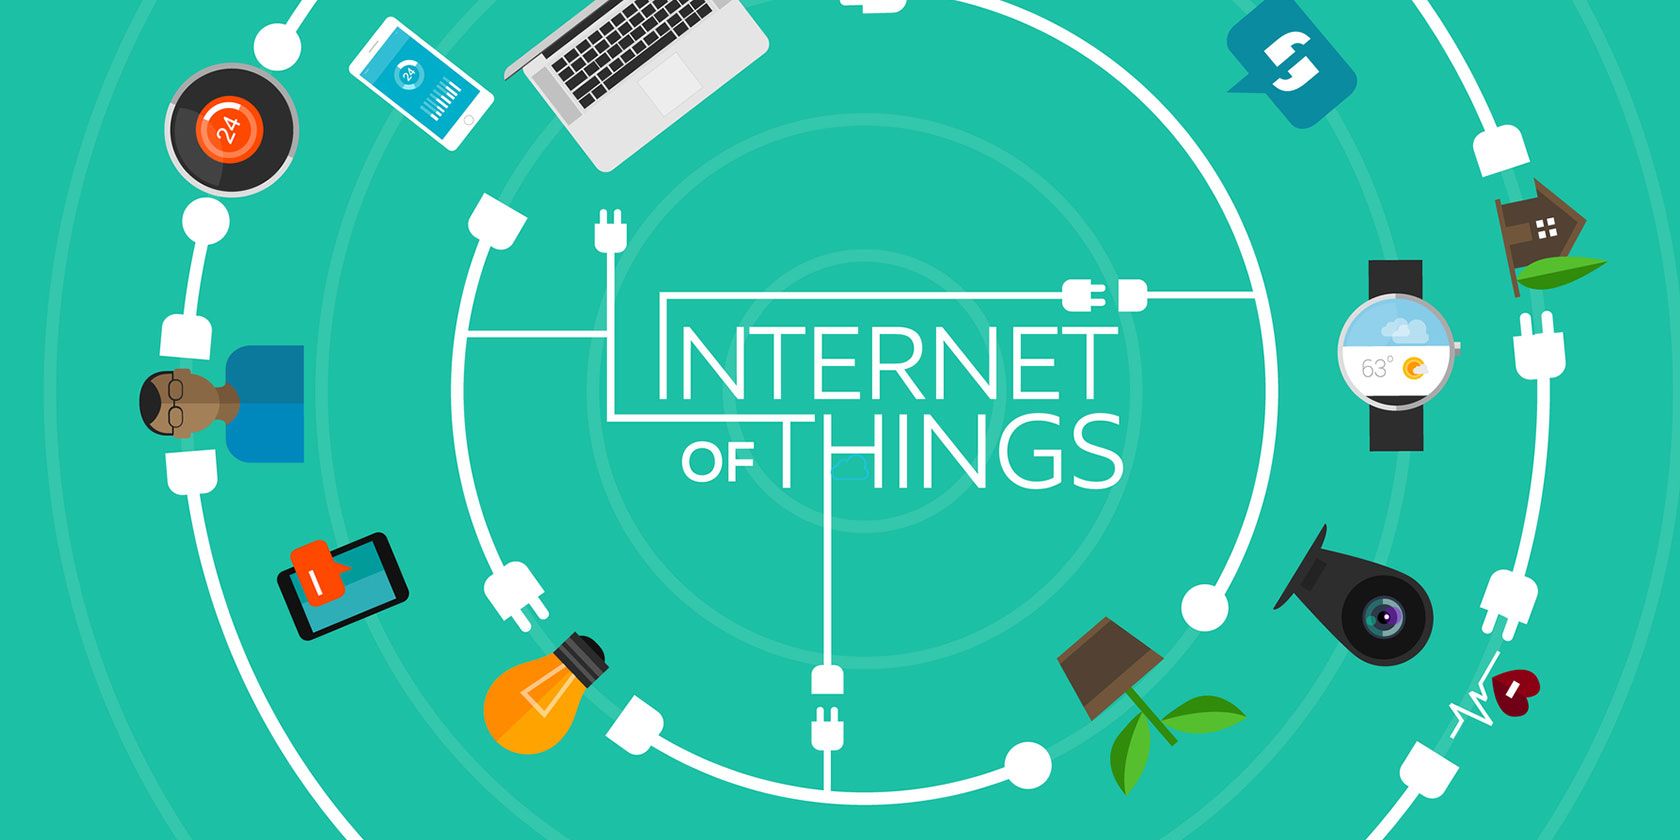 whats IoT image with internet connected devices